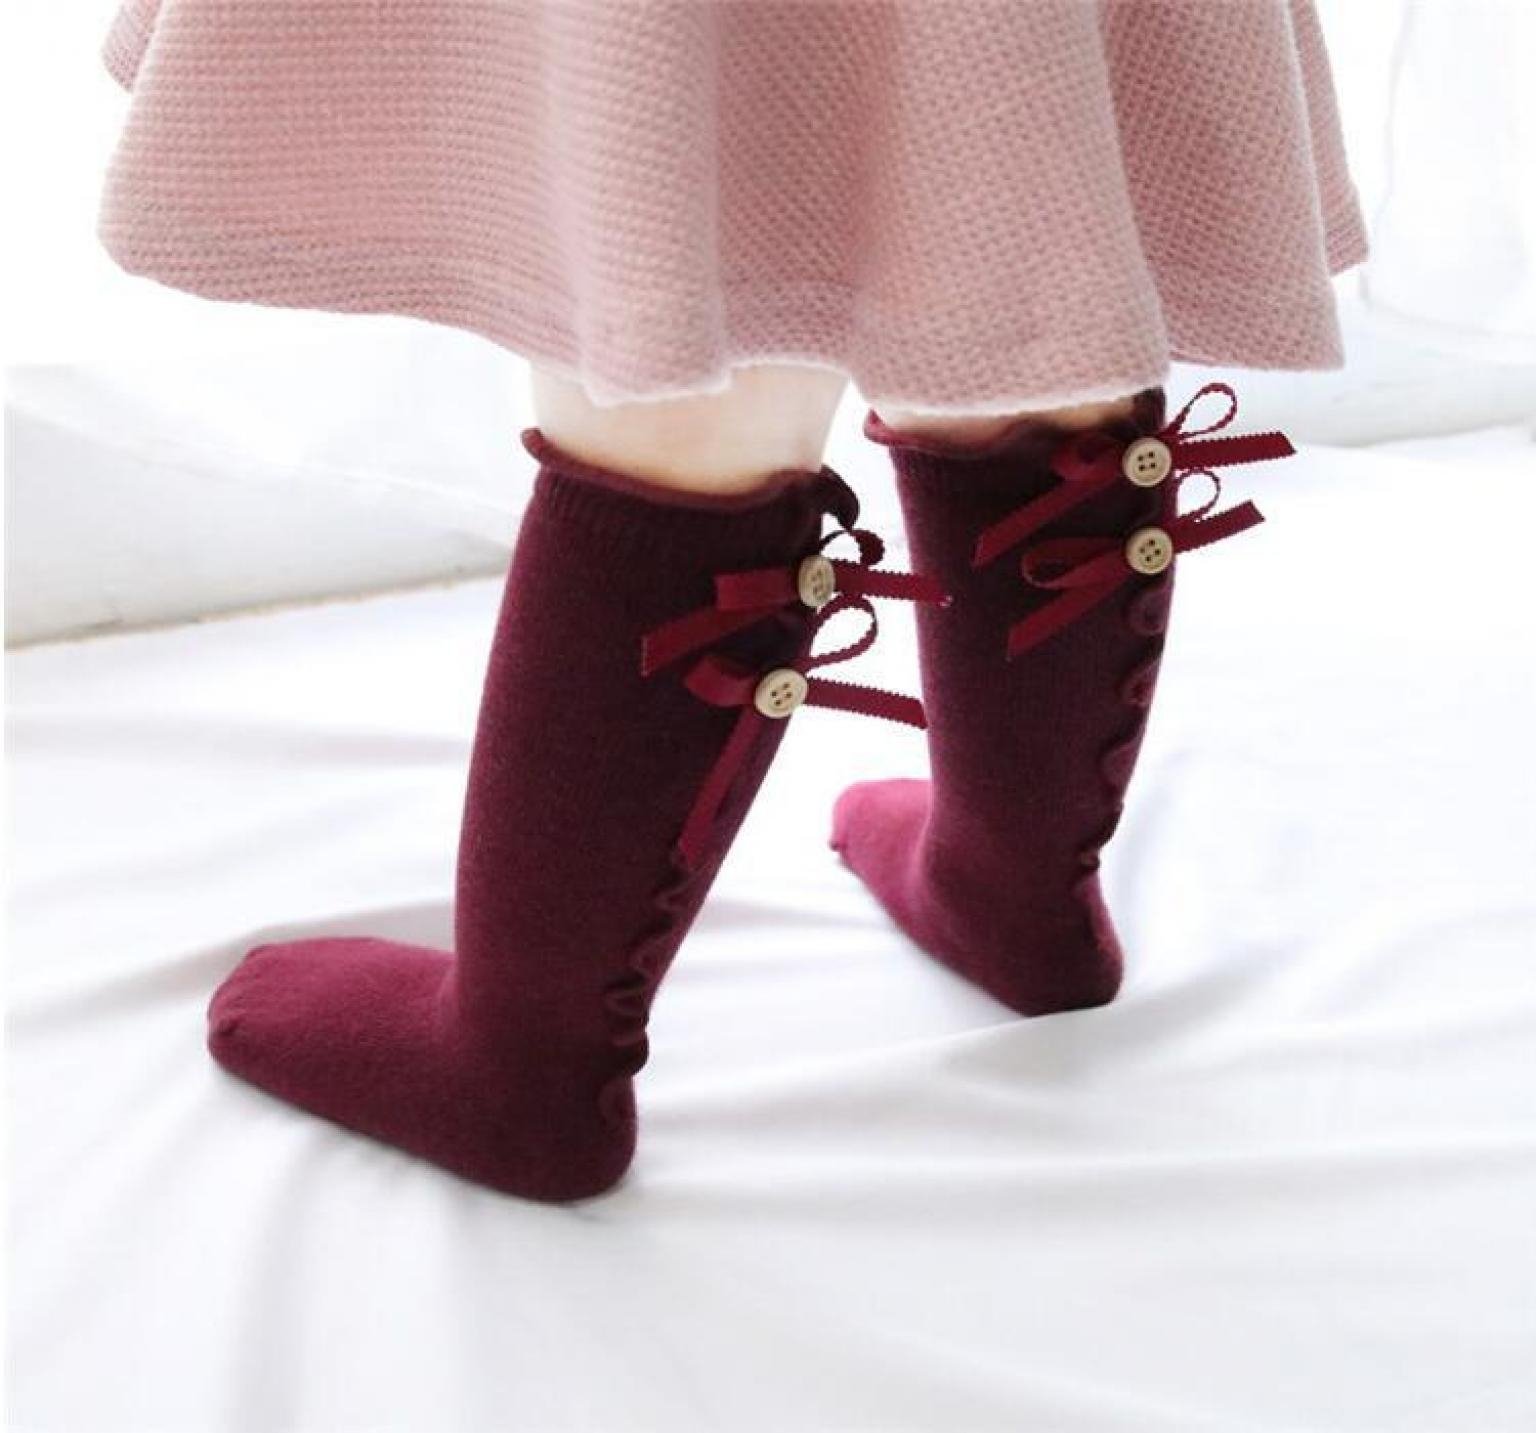 2020 Brand New Toddler Baby Kids Girl Bow Knee High Long Cotton Warm Casual Stockings Princess Flower Stockings